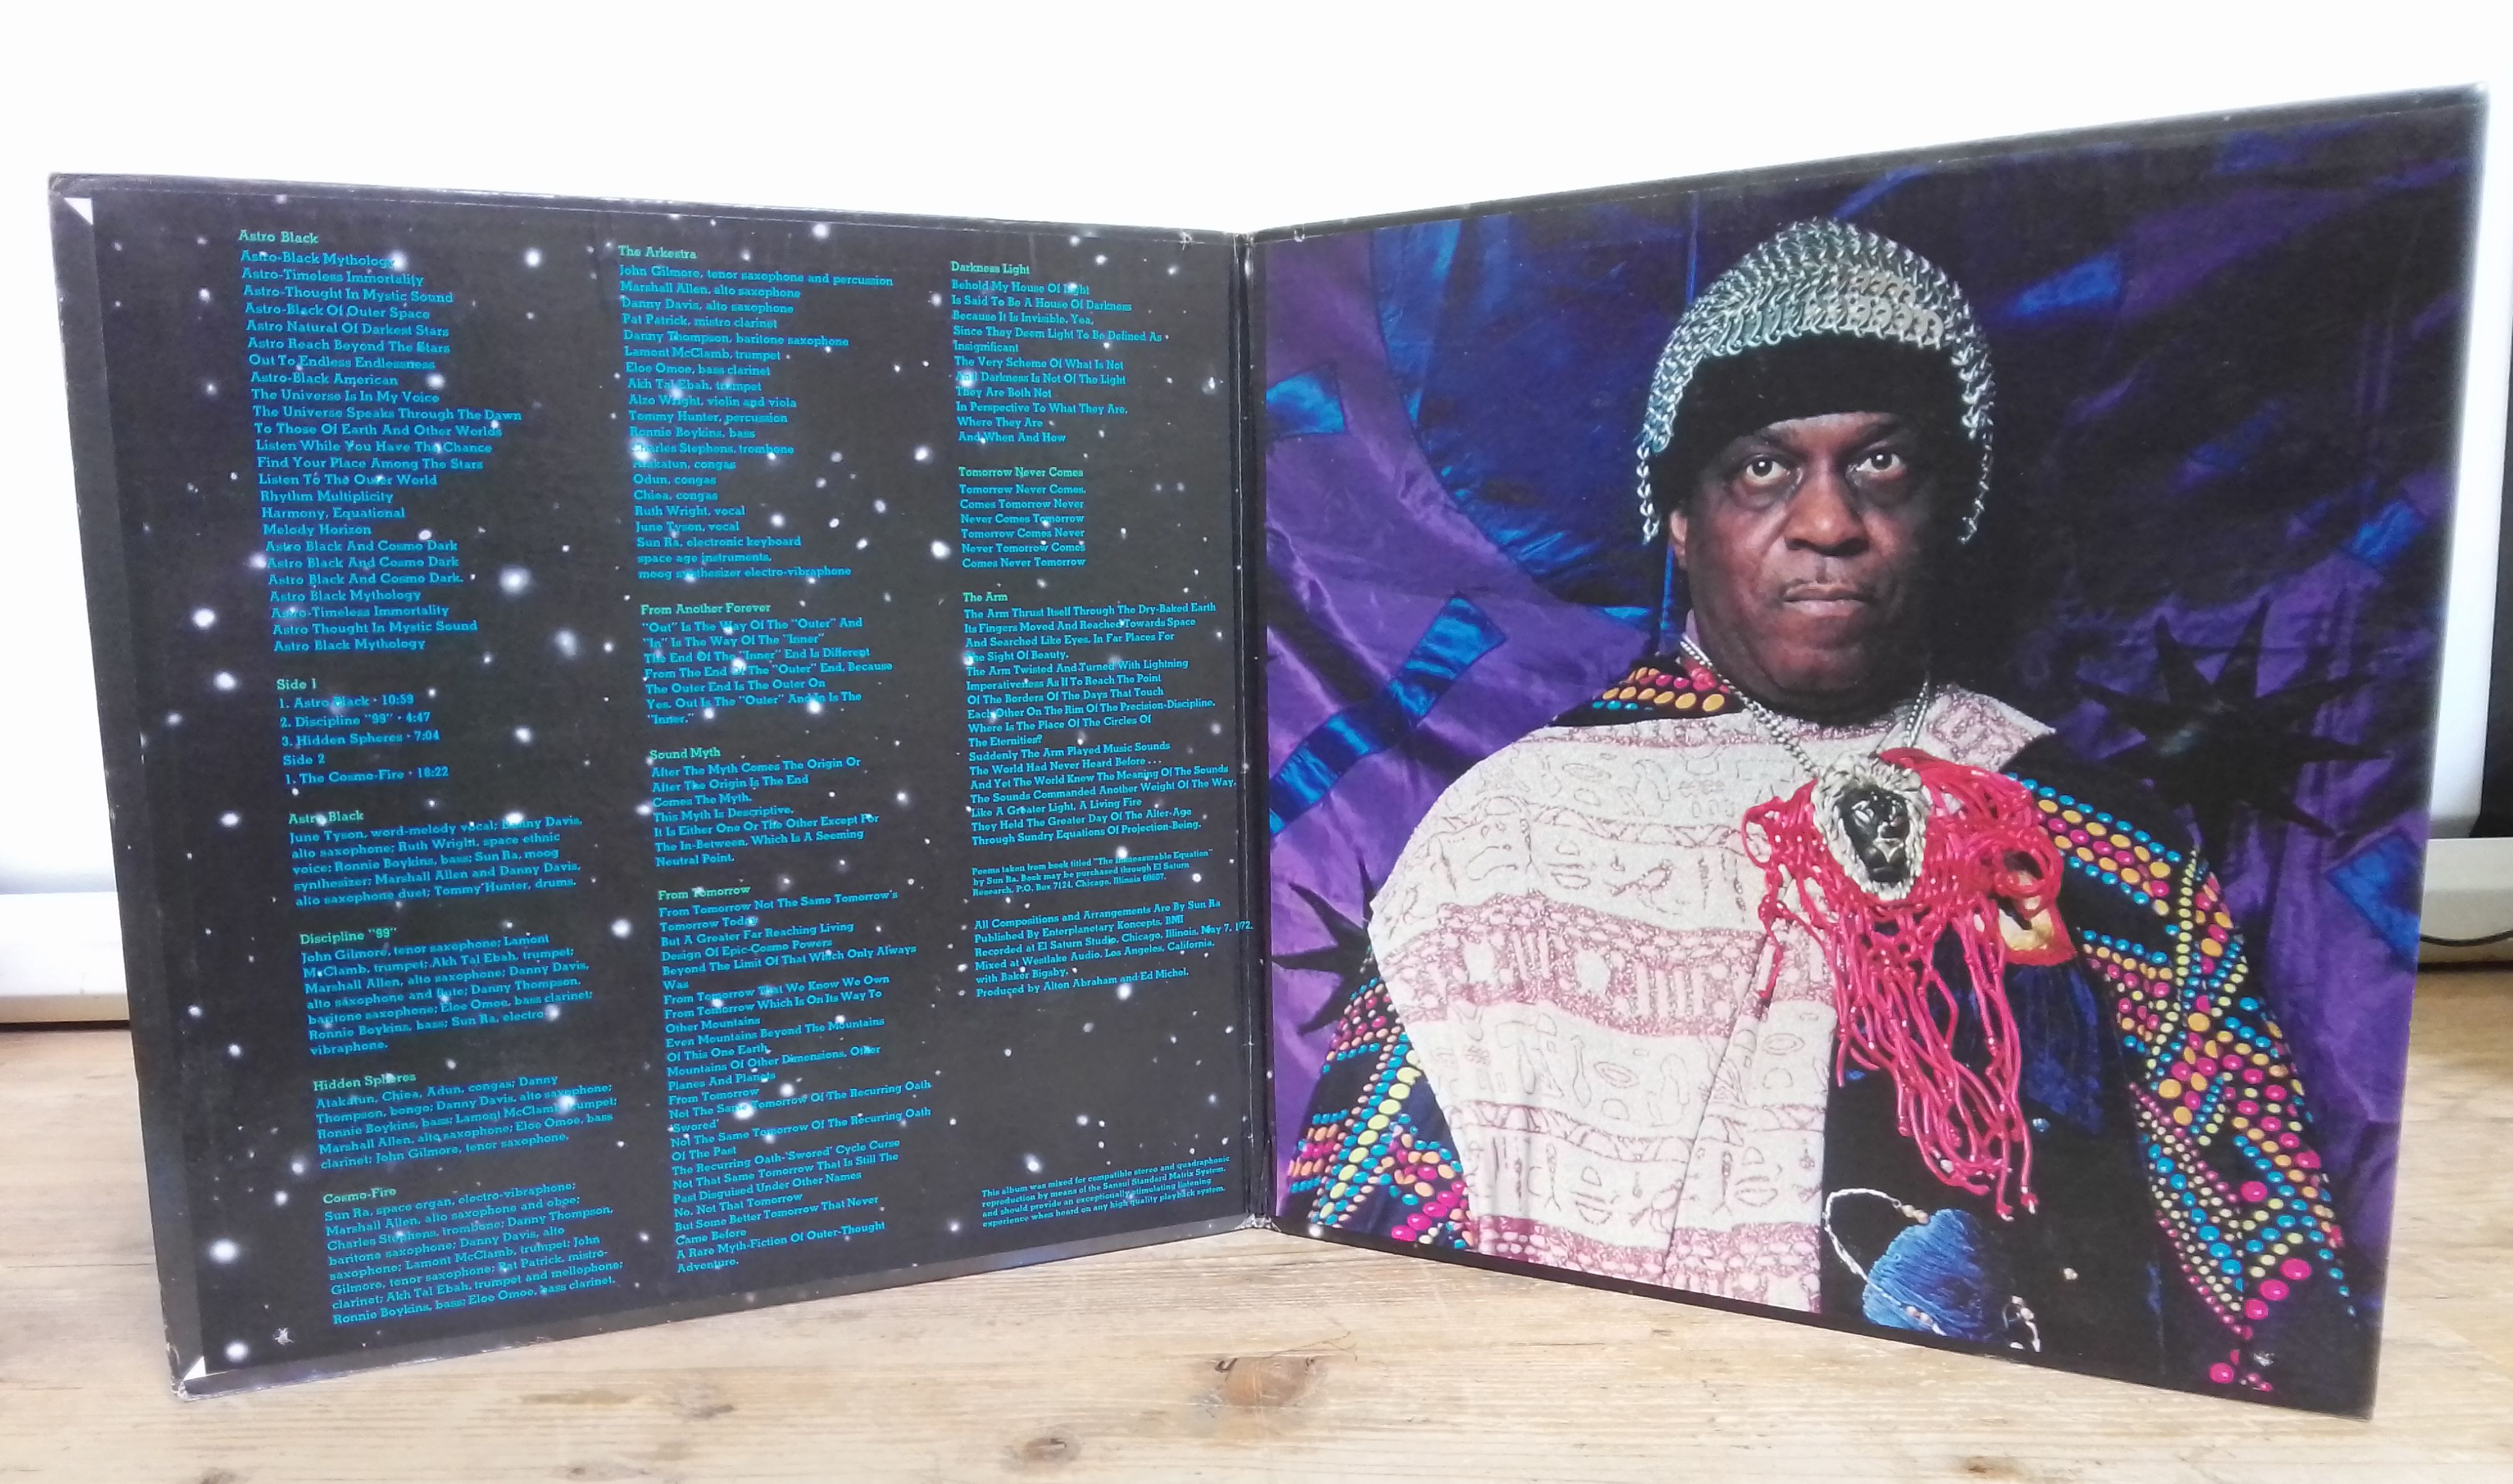 Two Sun Ra LPs: Astro Black, gatefold stereo LP, US 1973, Impulse AS-9255 and The Heliocentric - Image 2 of 8